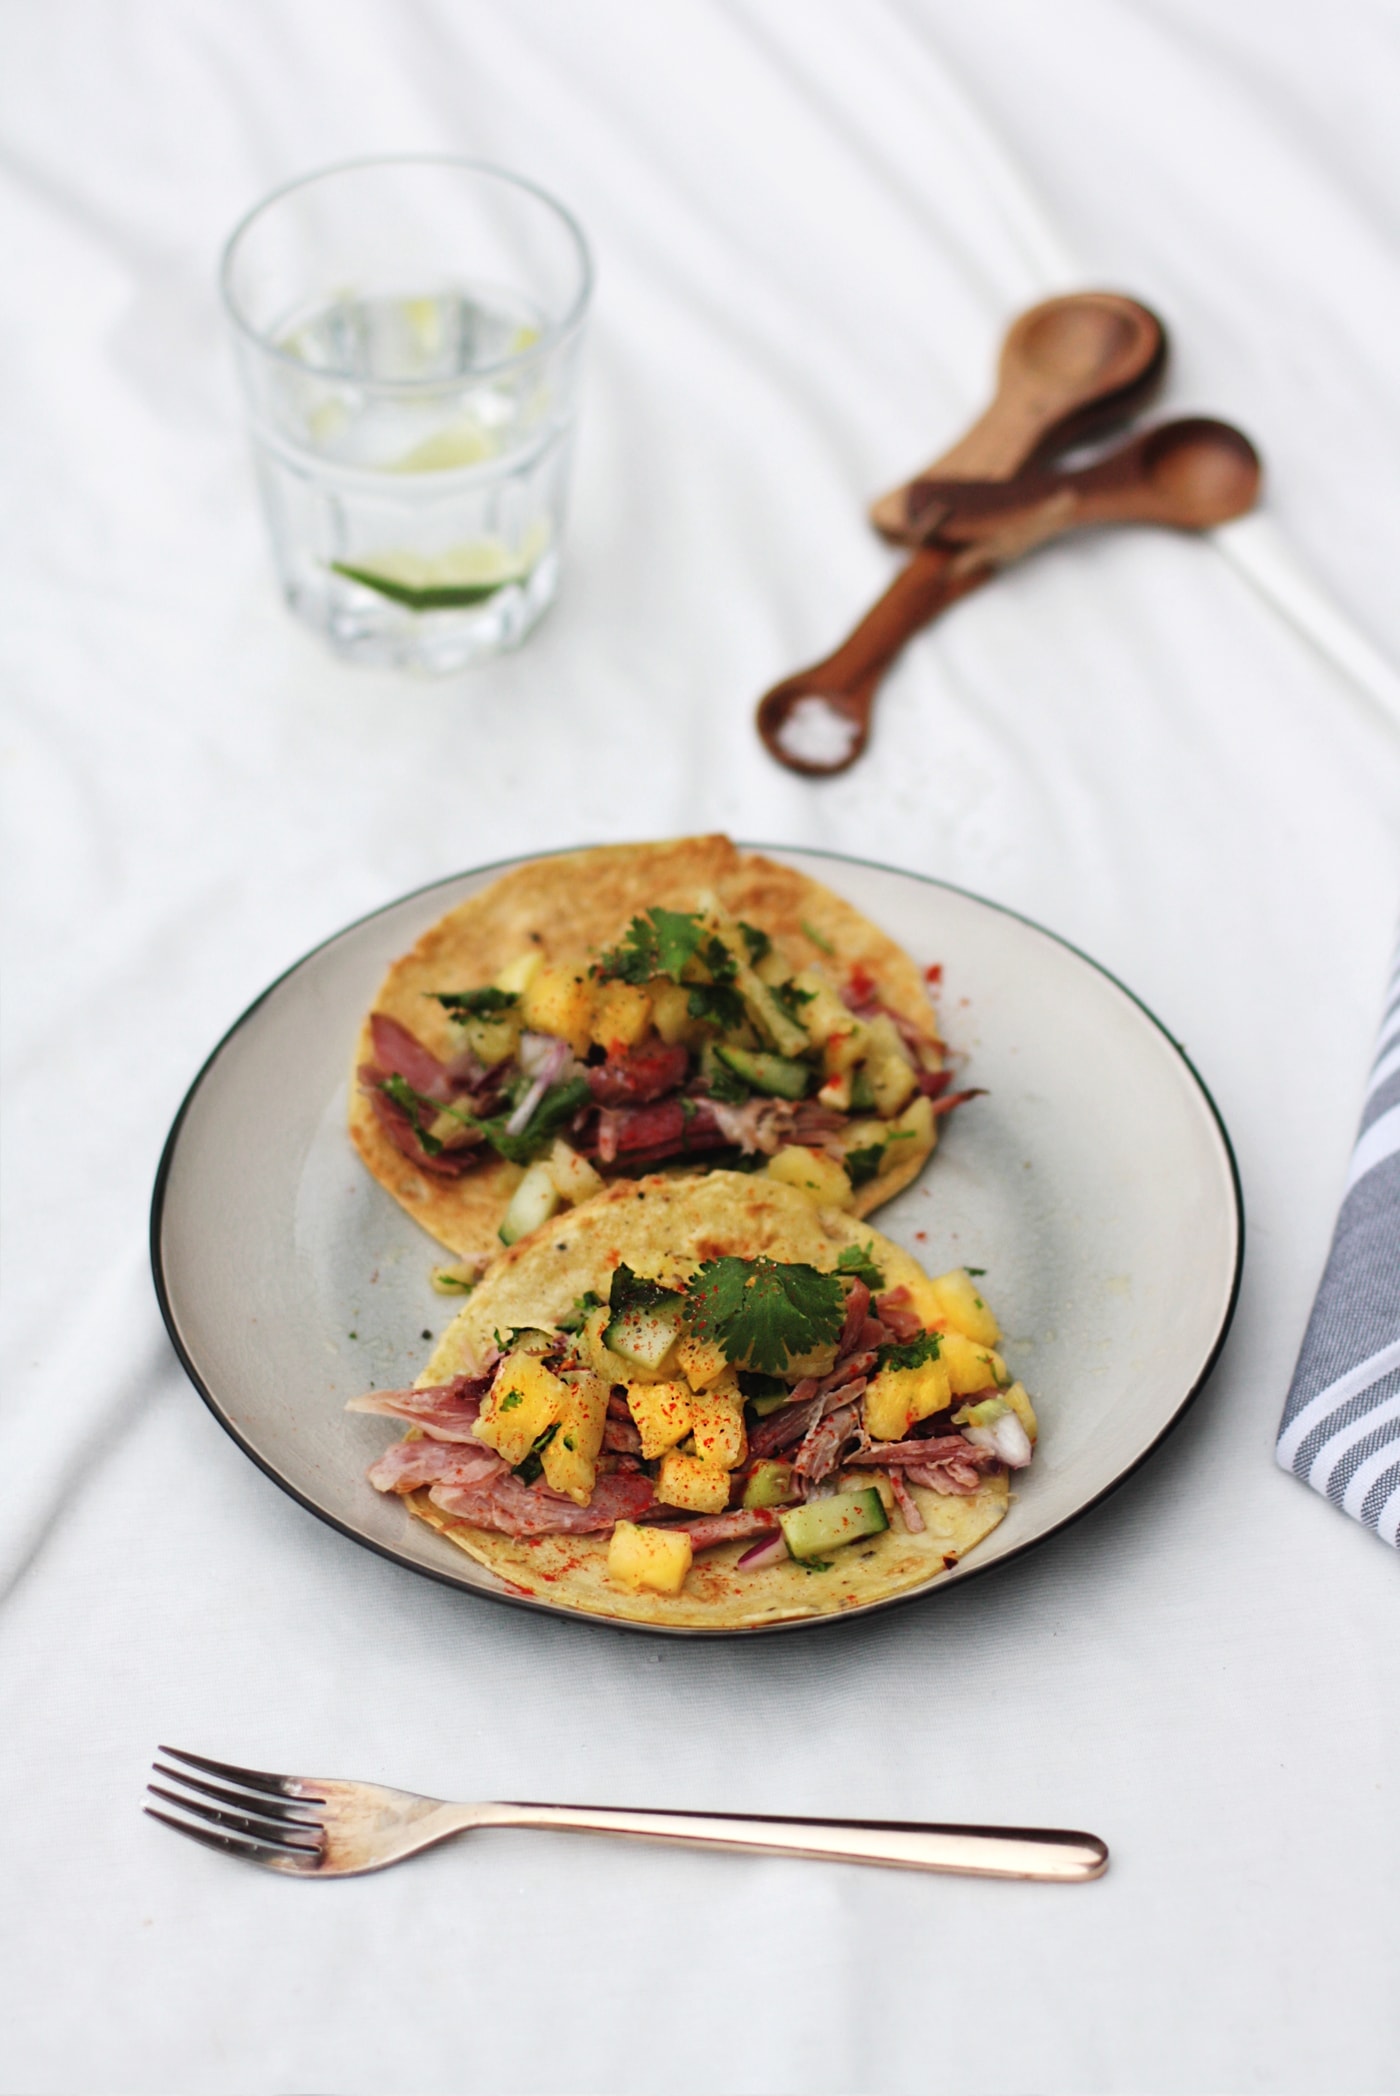 Paleo ham tacos with pineapple salsa recipe | easy grain free, gluten free, dairy free meal